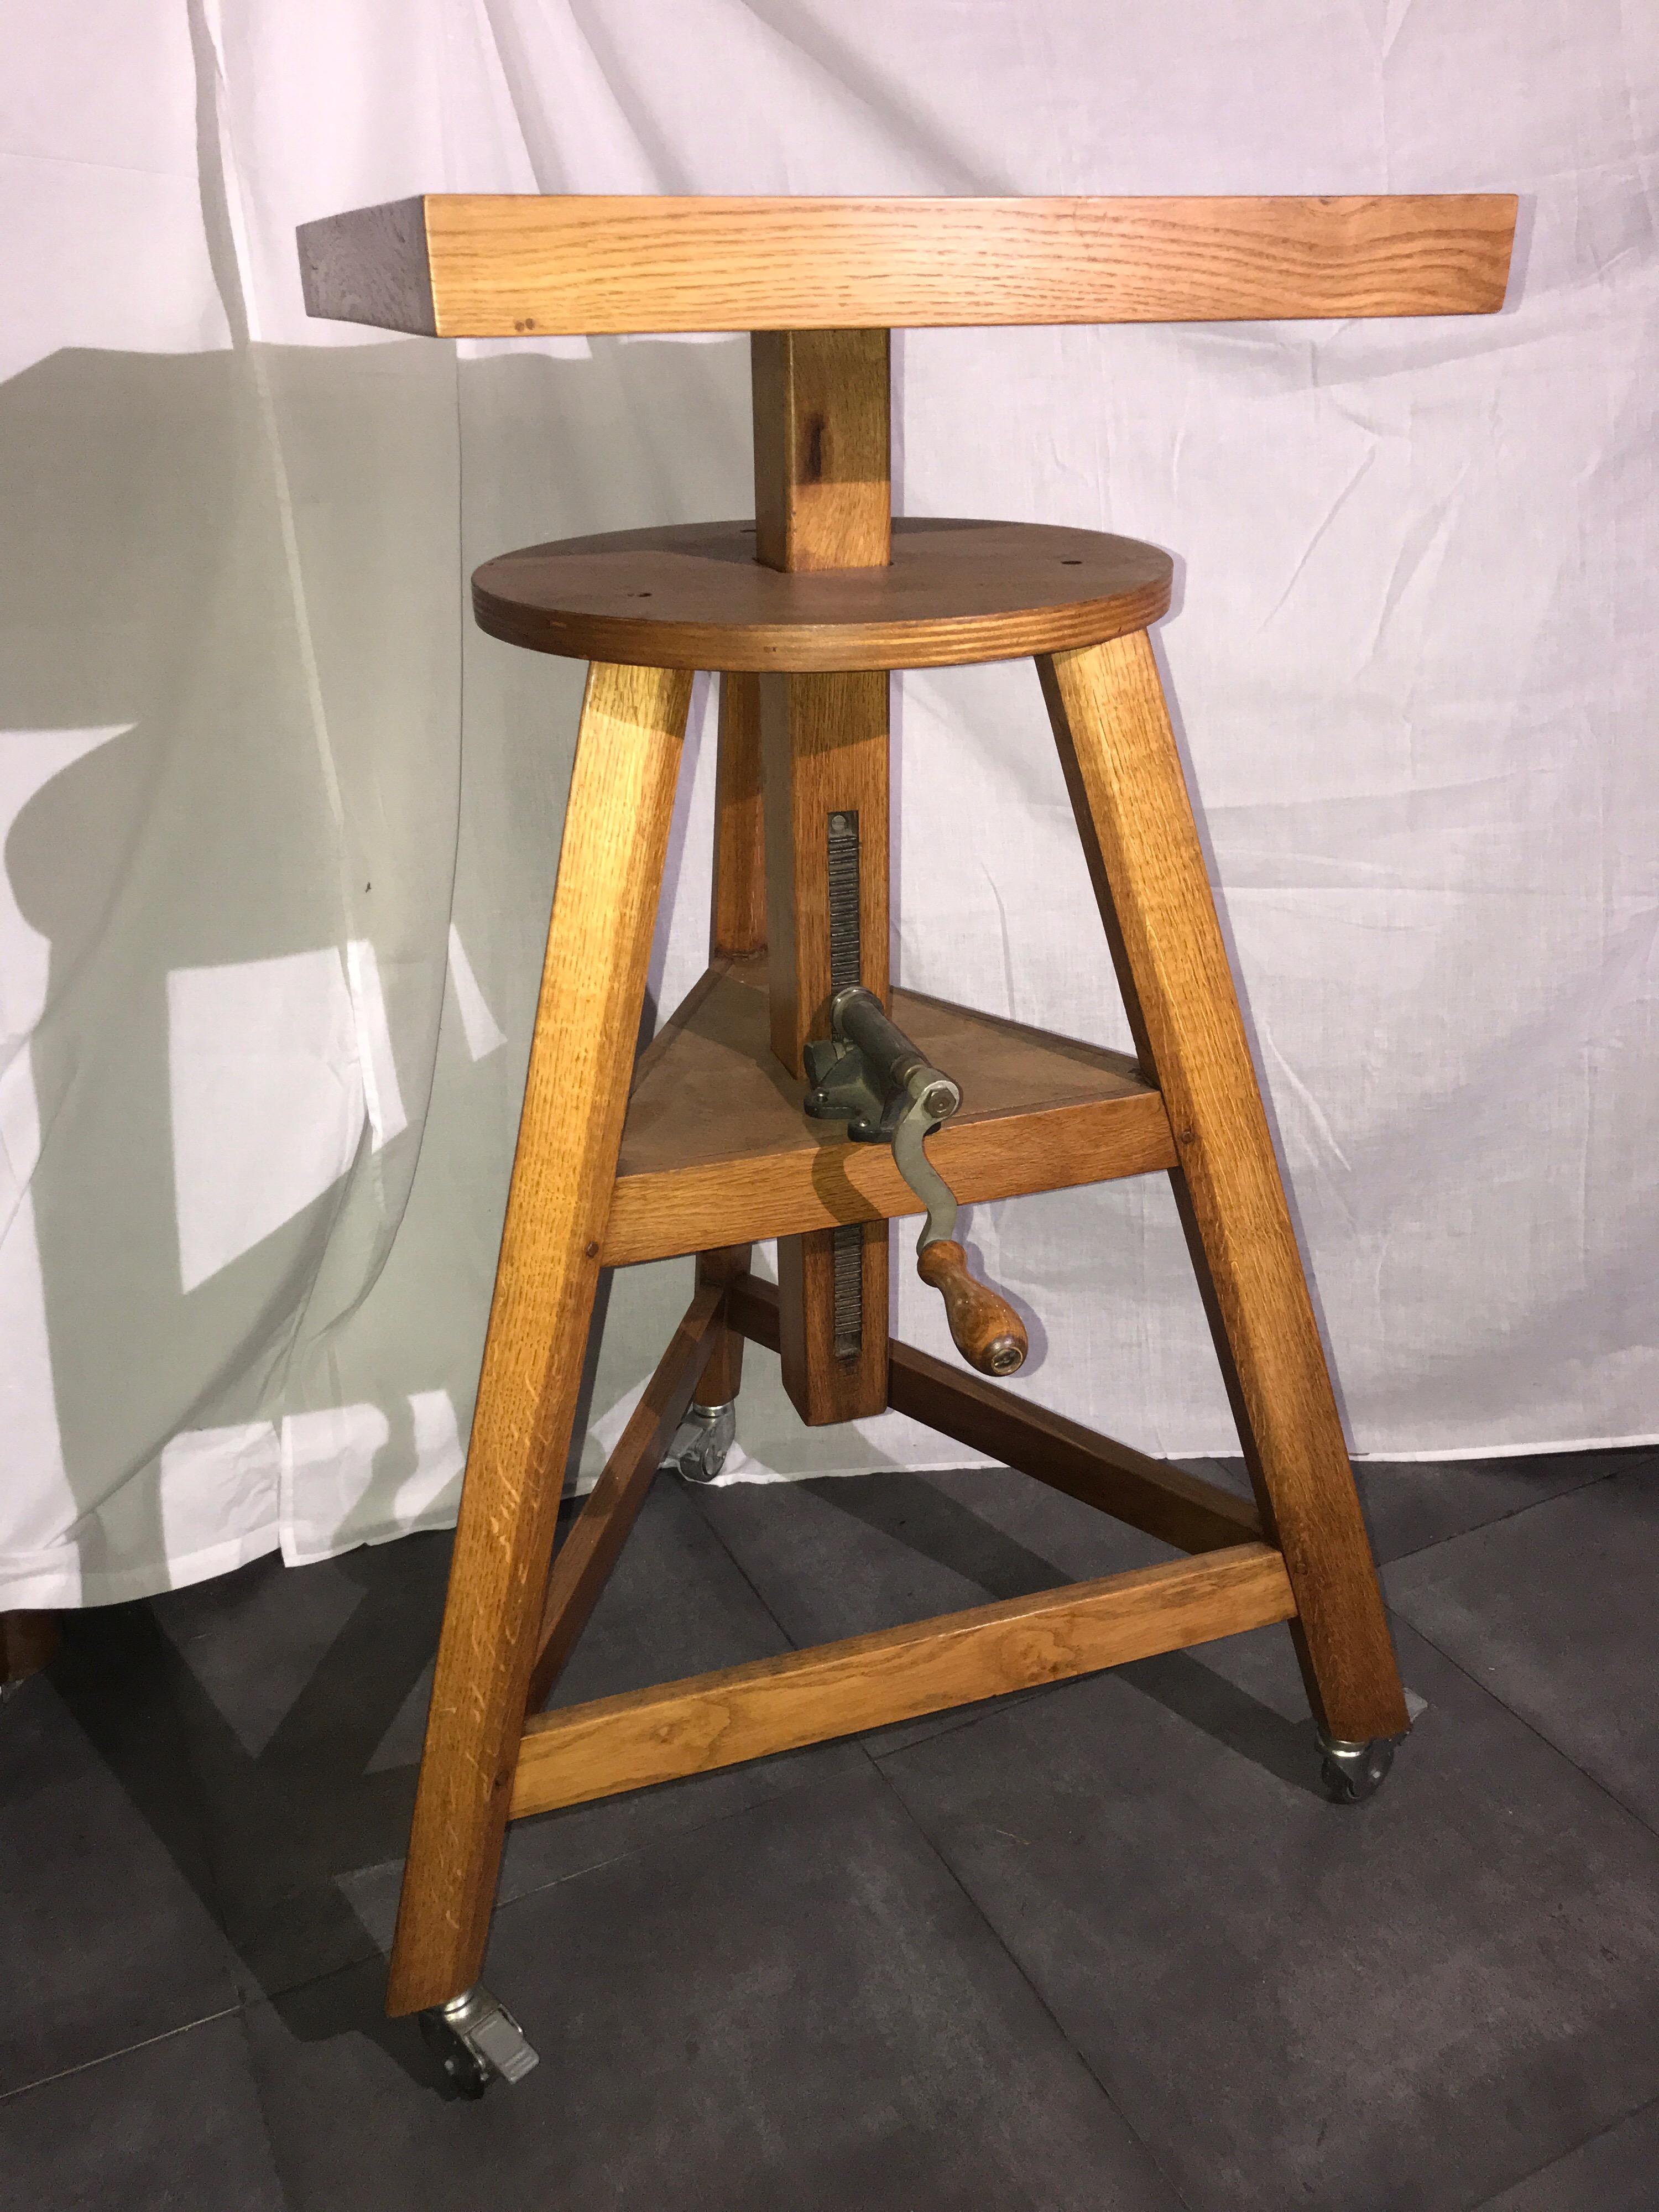 An ingenious sculptor stand in solid oak made in France circa 1950s.
It is a high quality model for an artist who wants the best tool to create.
The square tray is rotating and can rise from 100 cm to 150 cm / 39.37 to 59.05 inch.
A second small